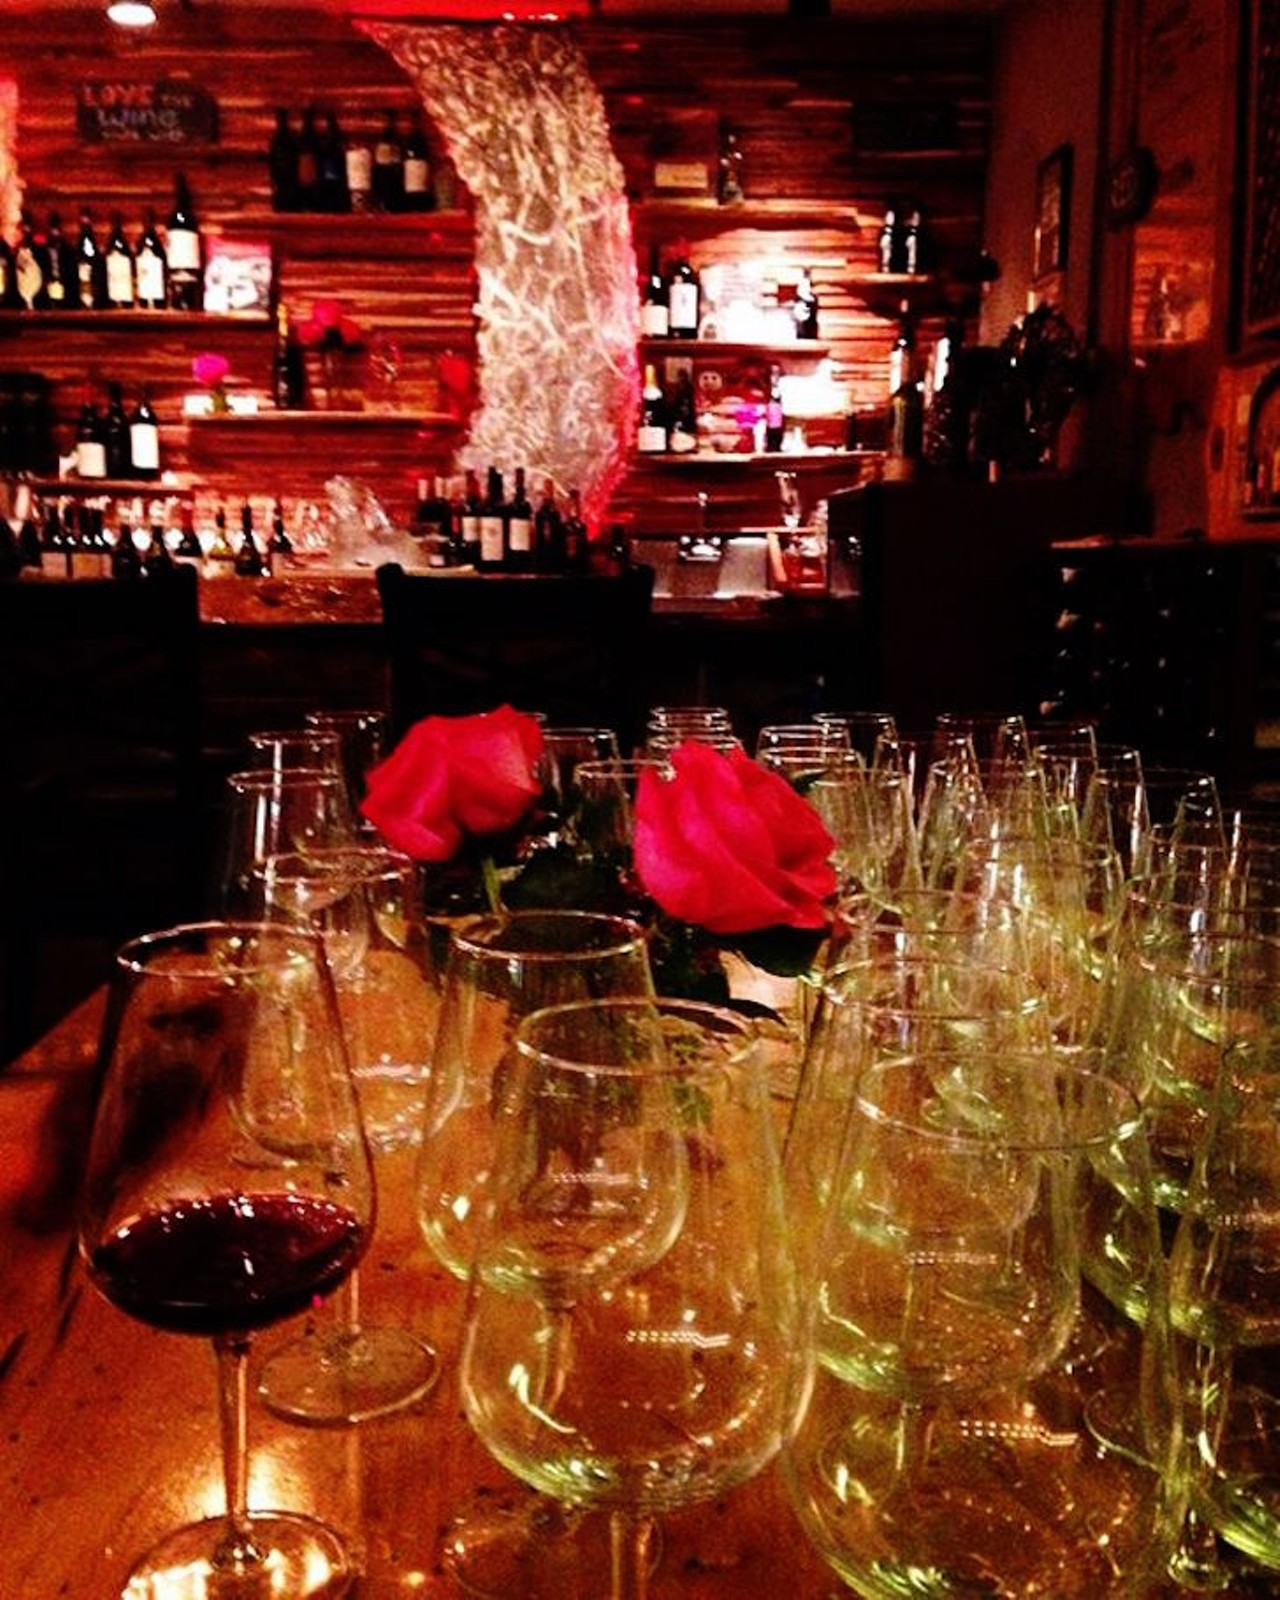 Swirlery Wine Bar
Feb. 12-14, 3 p.m. to 7 p.m.; $35
If you&#146;re looking for an afternoon sweet sweet wine drinking, bring your significant other to &#147;Love and Wine&#148; Valentine&#146;s Day weekend at Swirlery. The event is $35 per couple, which includes two flights and a red rose.
Photo via swirlery/Instagram